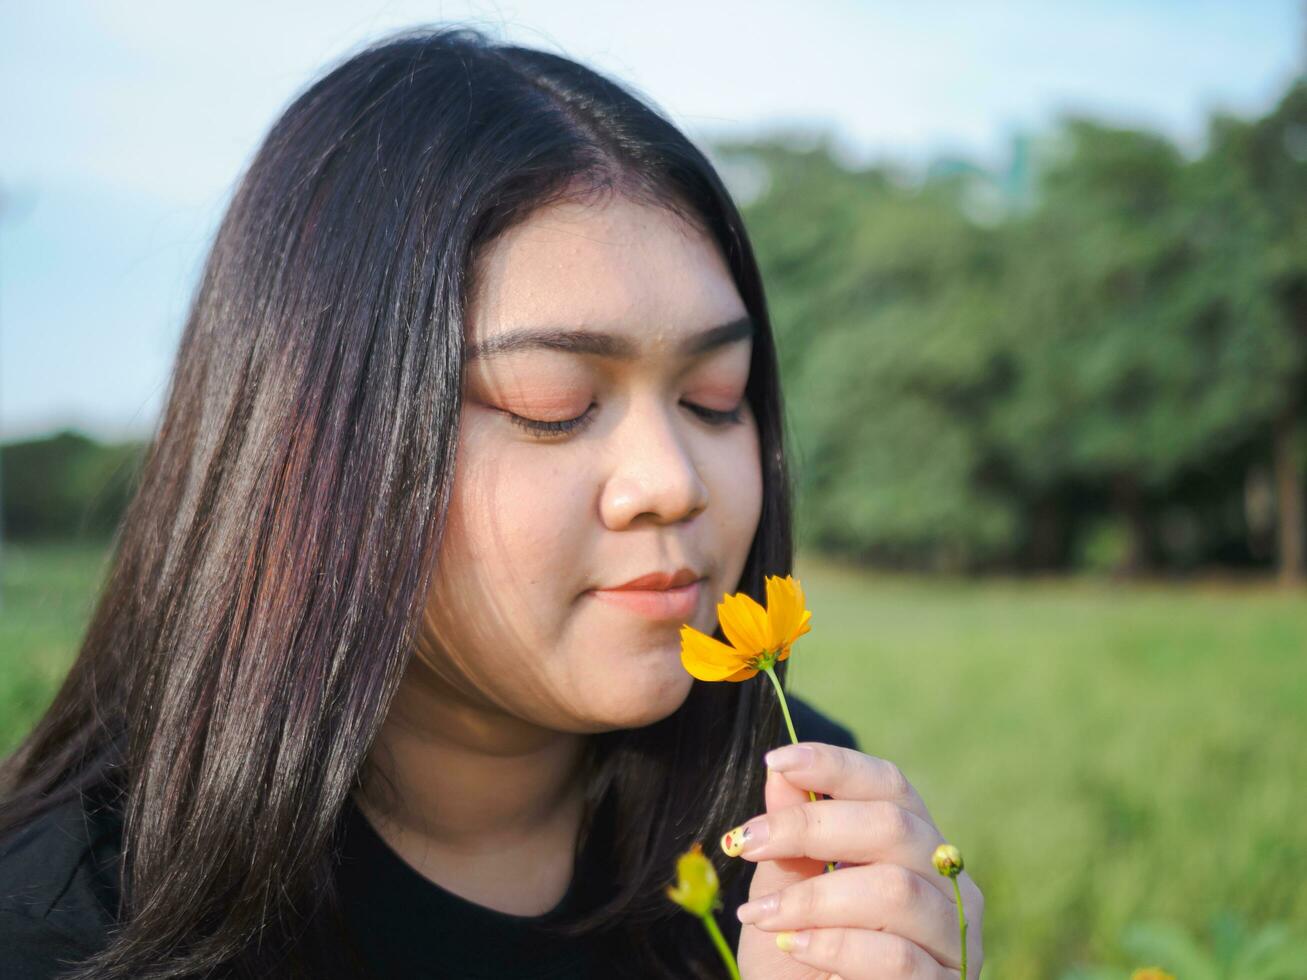 Portrait of gardener young woman asian chubby cute beautiful one person looking hand holding caring for plants leaves garden park beauty flowers evening sunlight fresh smiling happy relax summer day photo